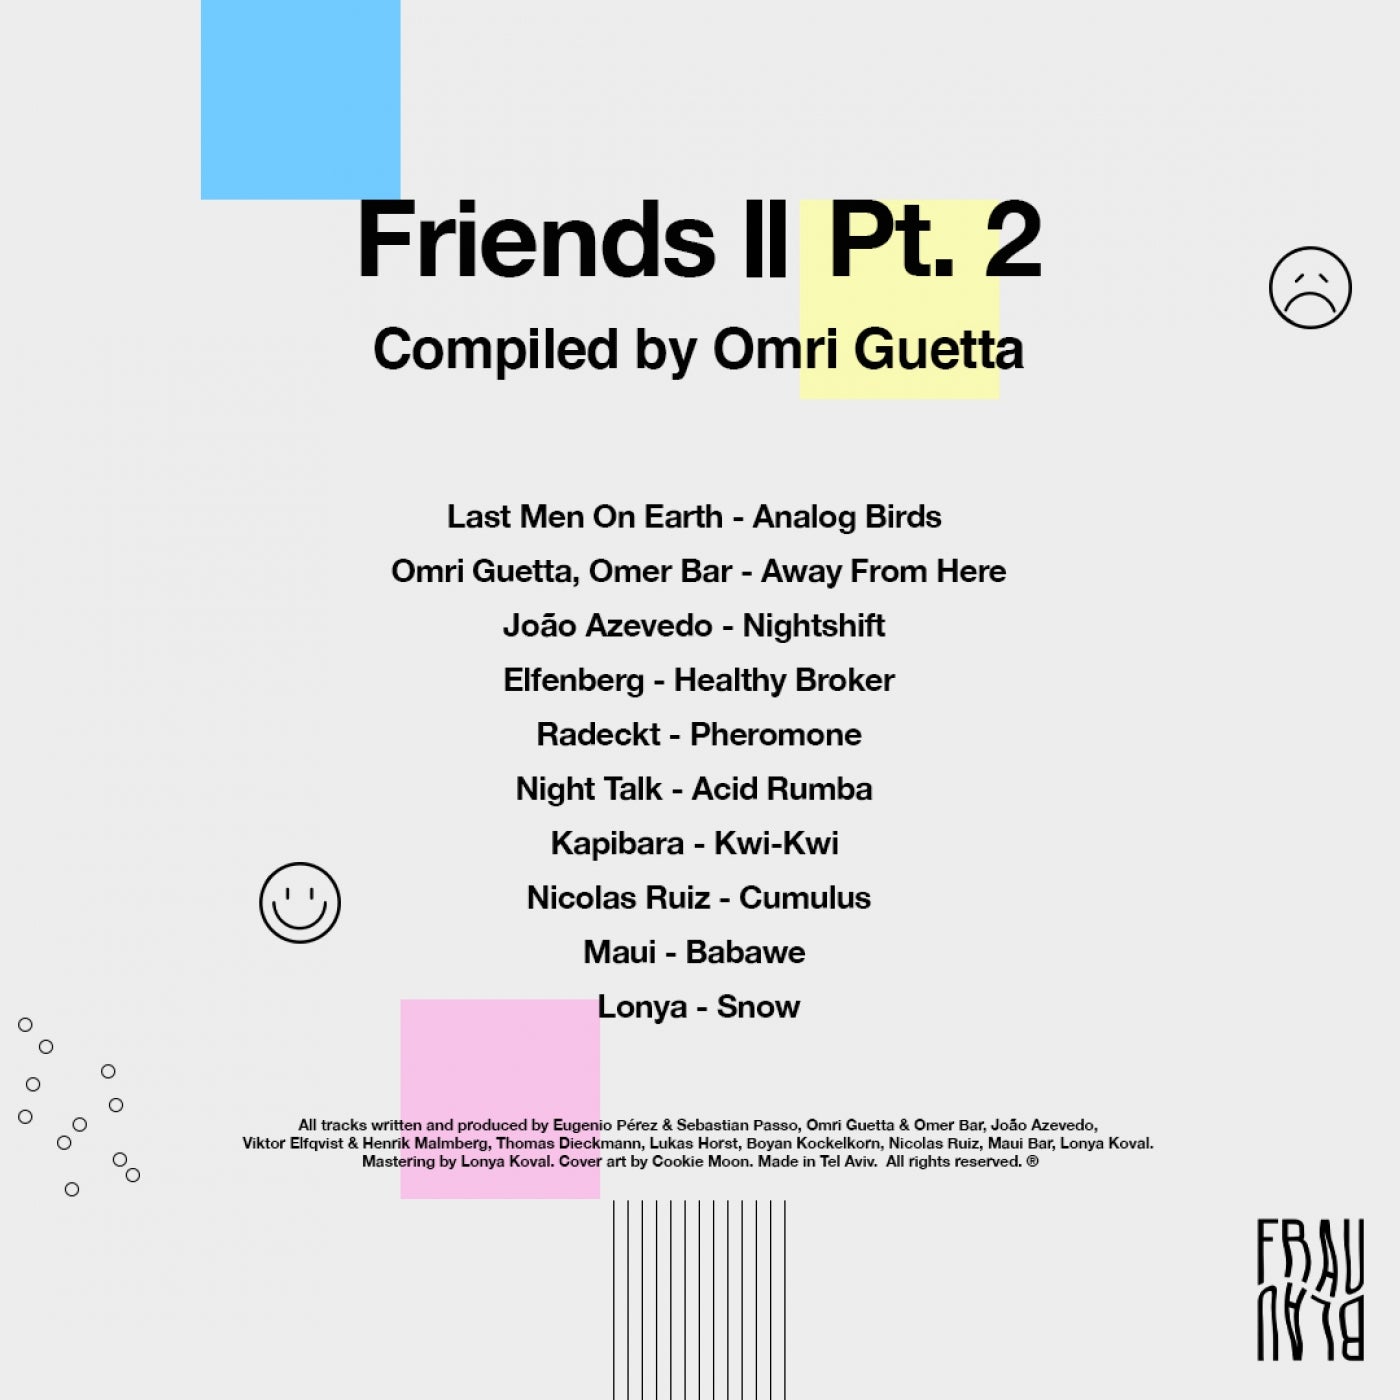 Friends II Pt. 2 - Compiled By Omri Guetta